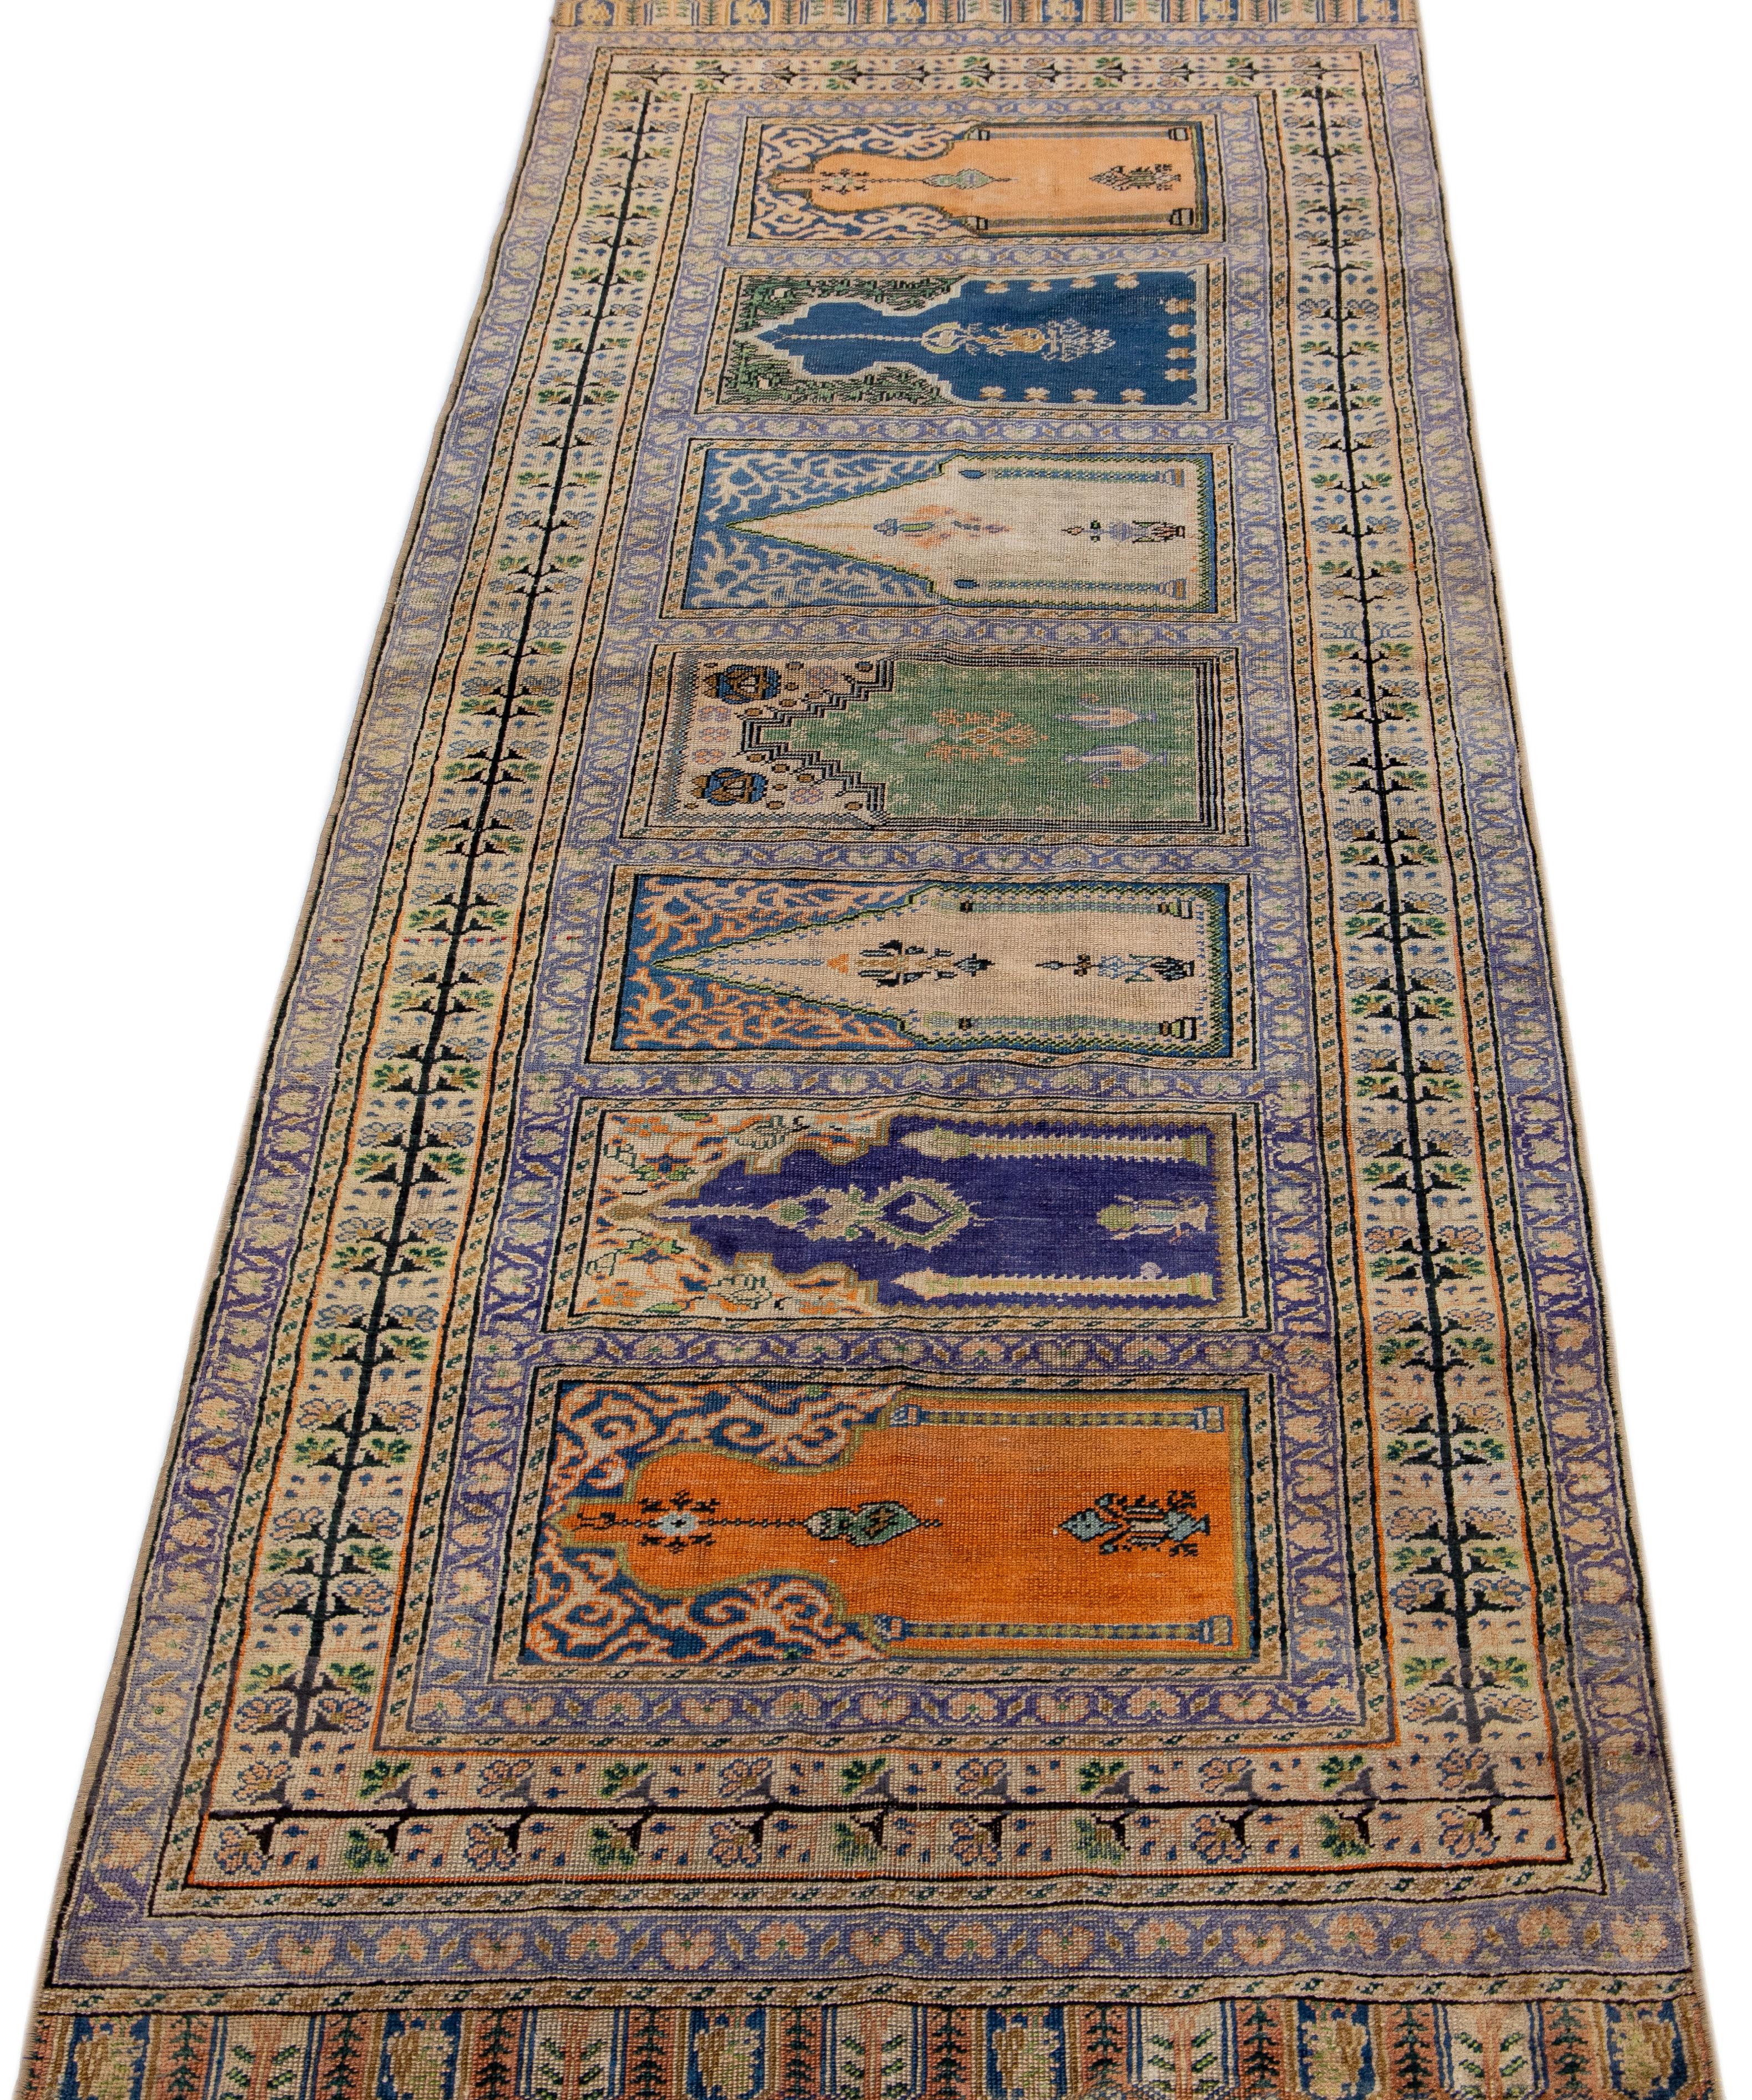 Beautiful antique Kasari hand knotted silk rug with a beige color field. This piece has multicolor accents all over the geometric pattern. This luxurious Fine art piece is crafted with intricate details and carefully chosen colors, creating an